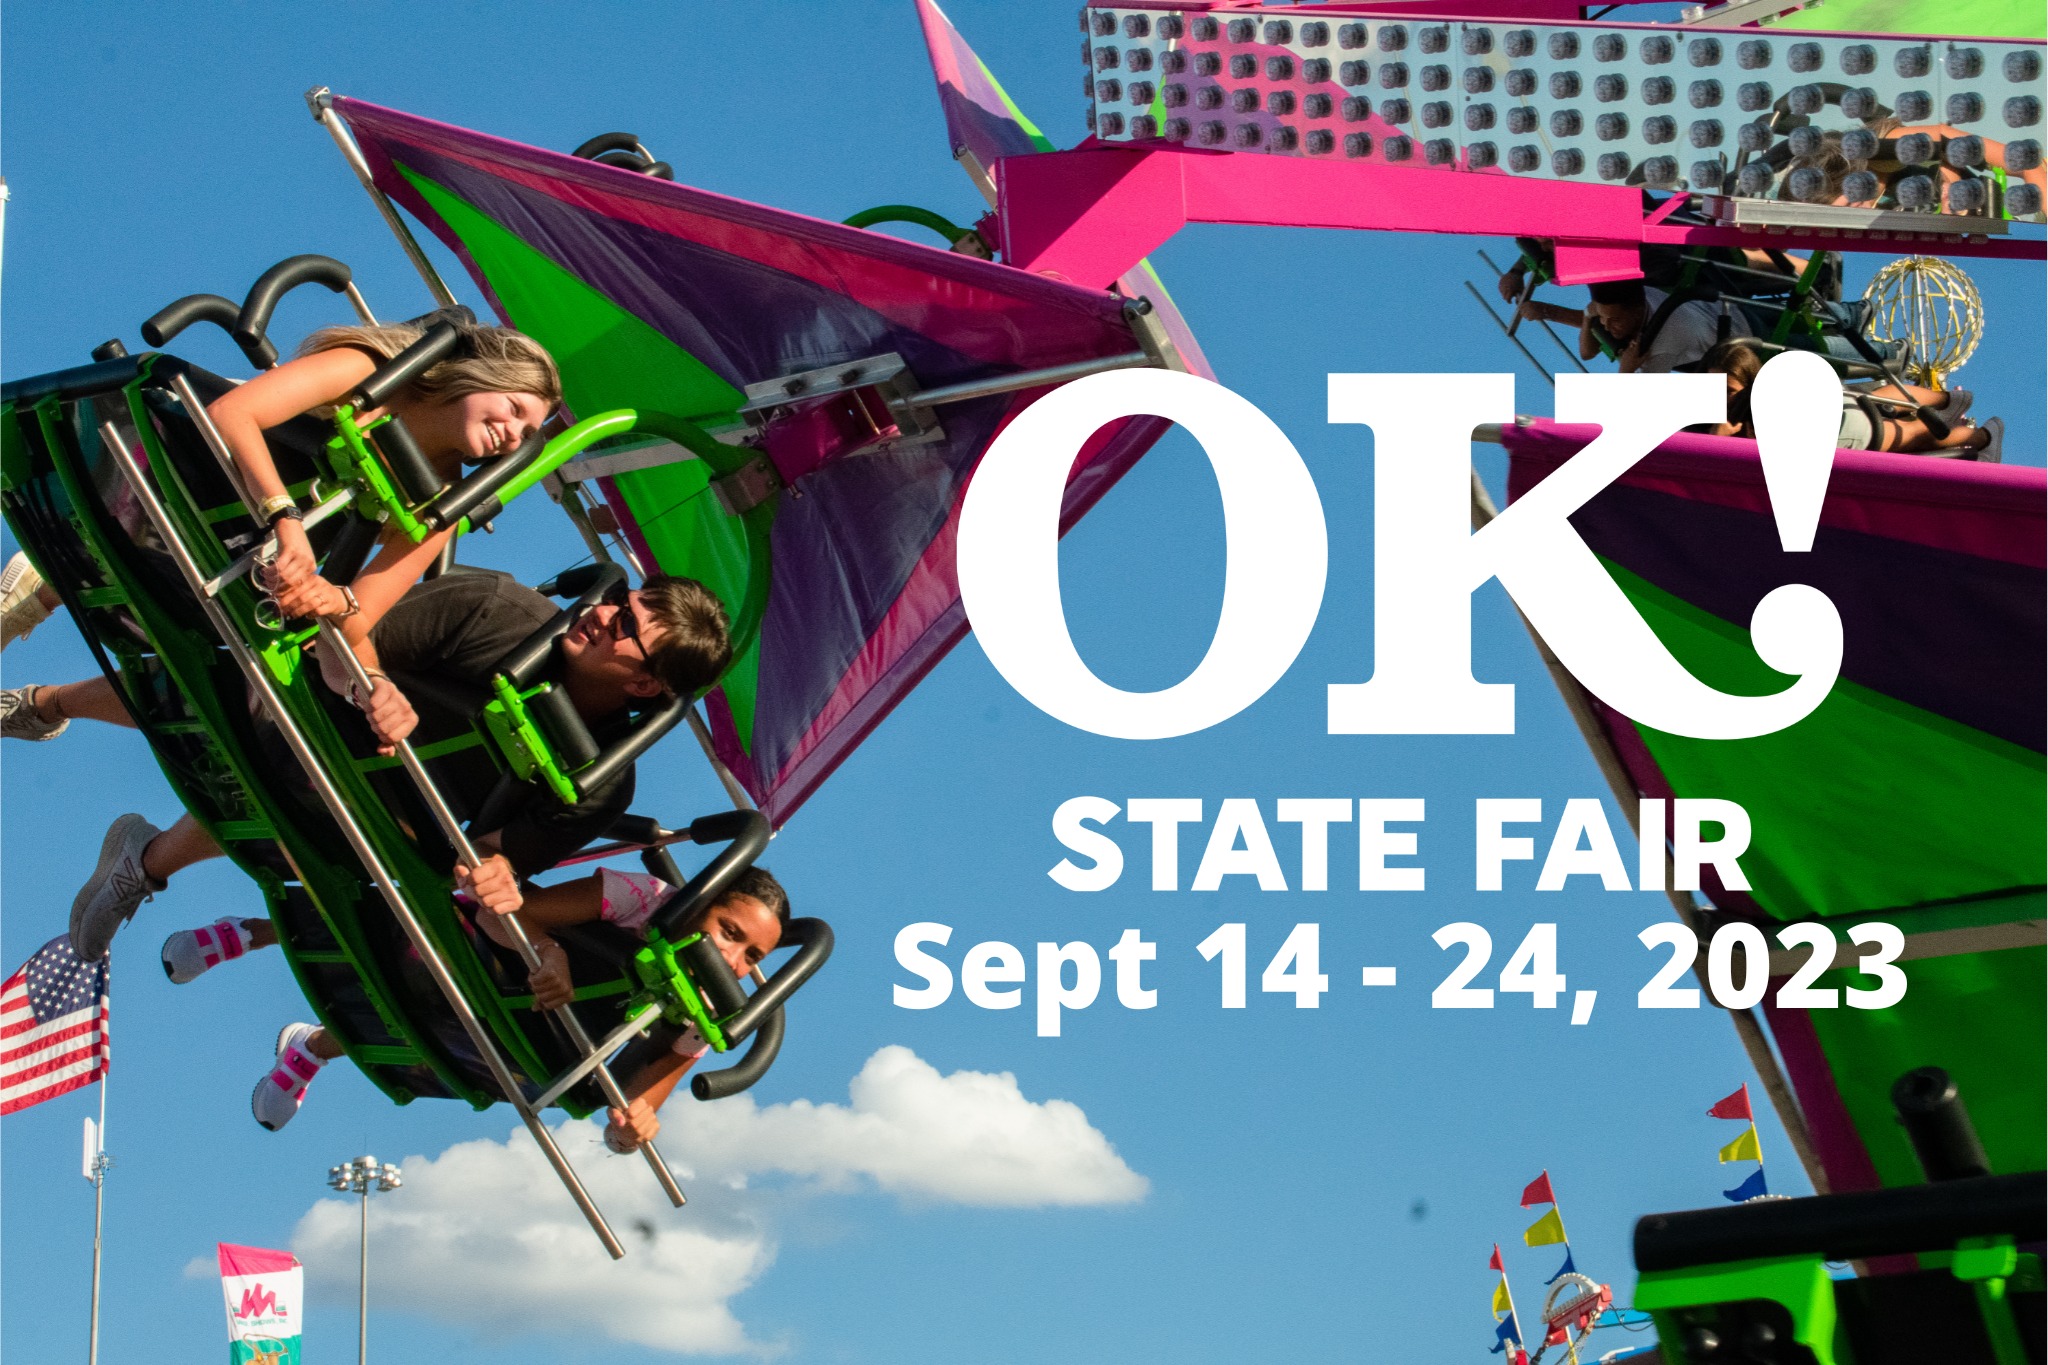 Experience the Best of Oklahoma at the Annual Oklahoma State Fair